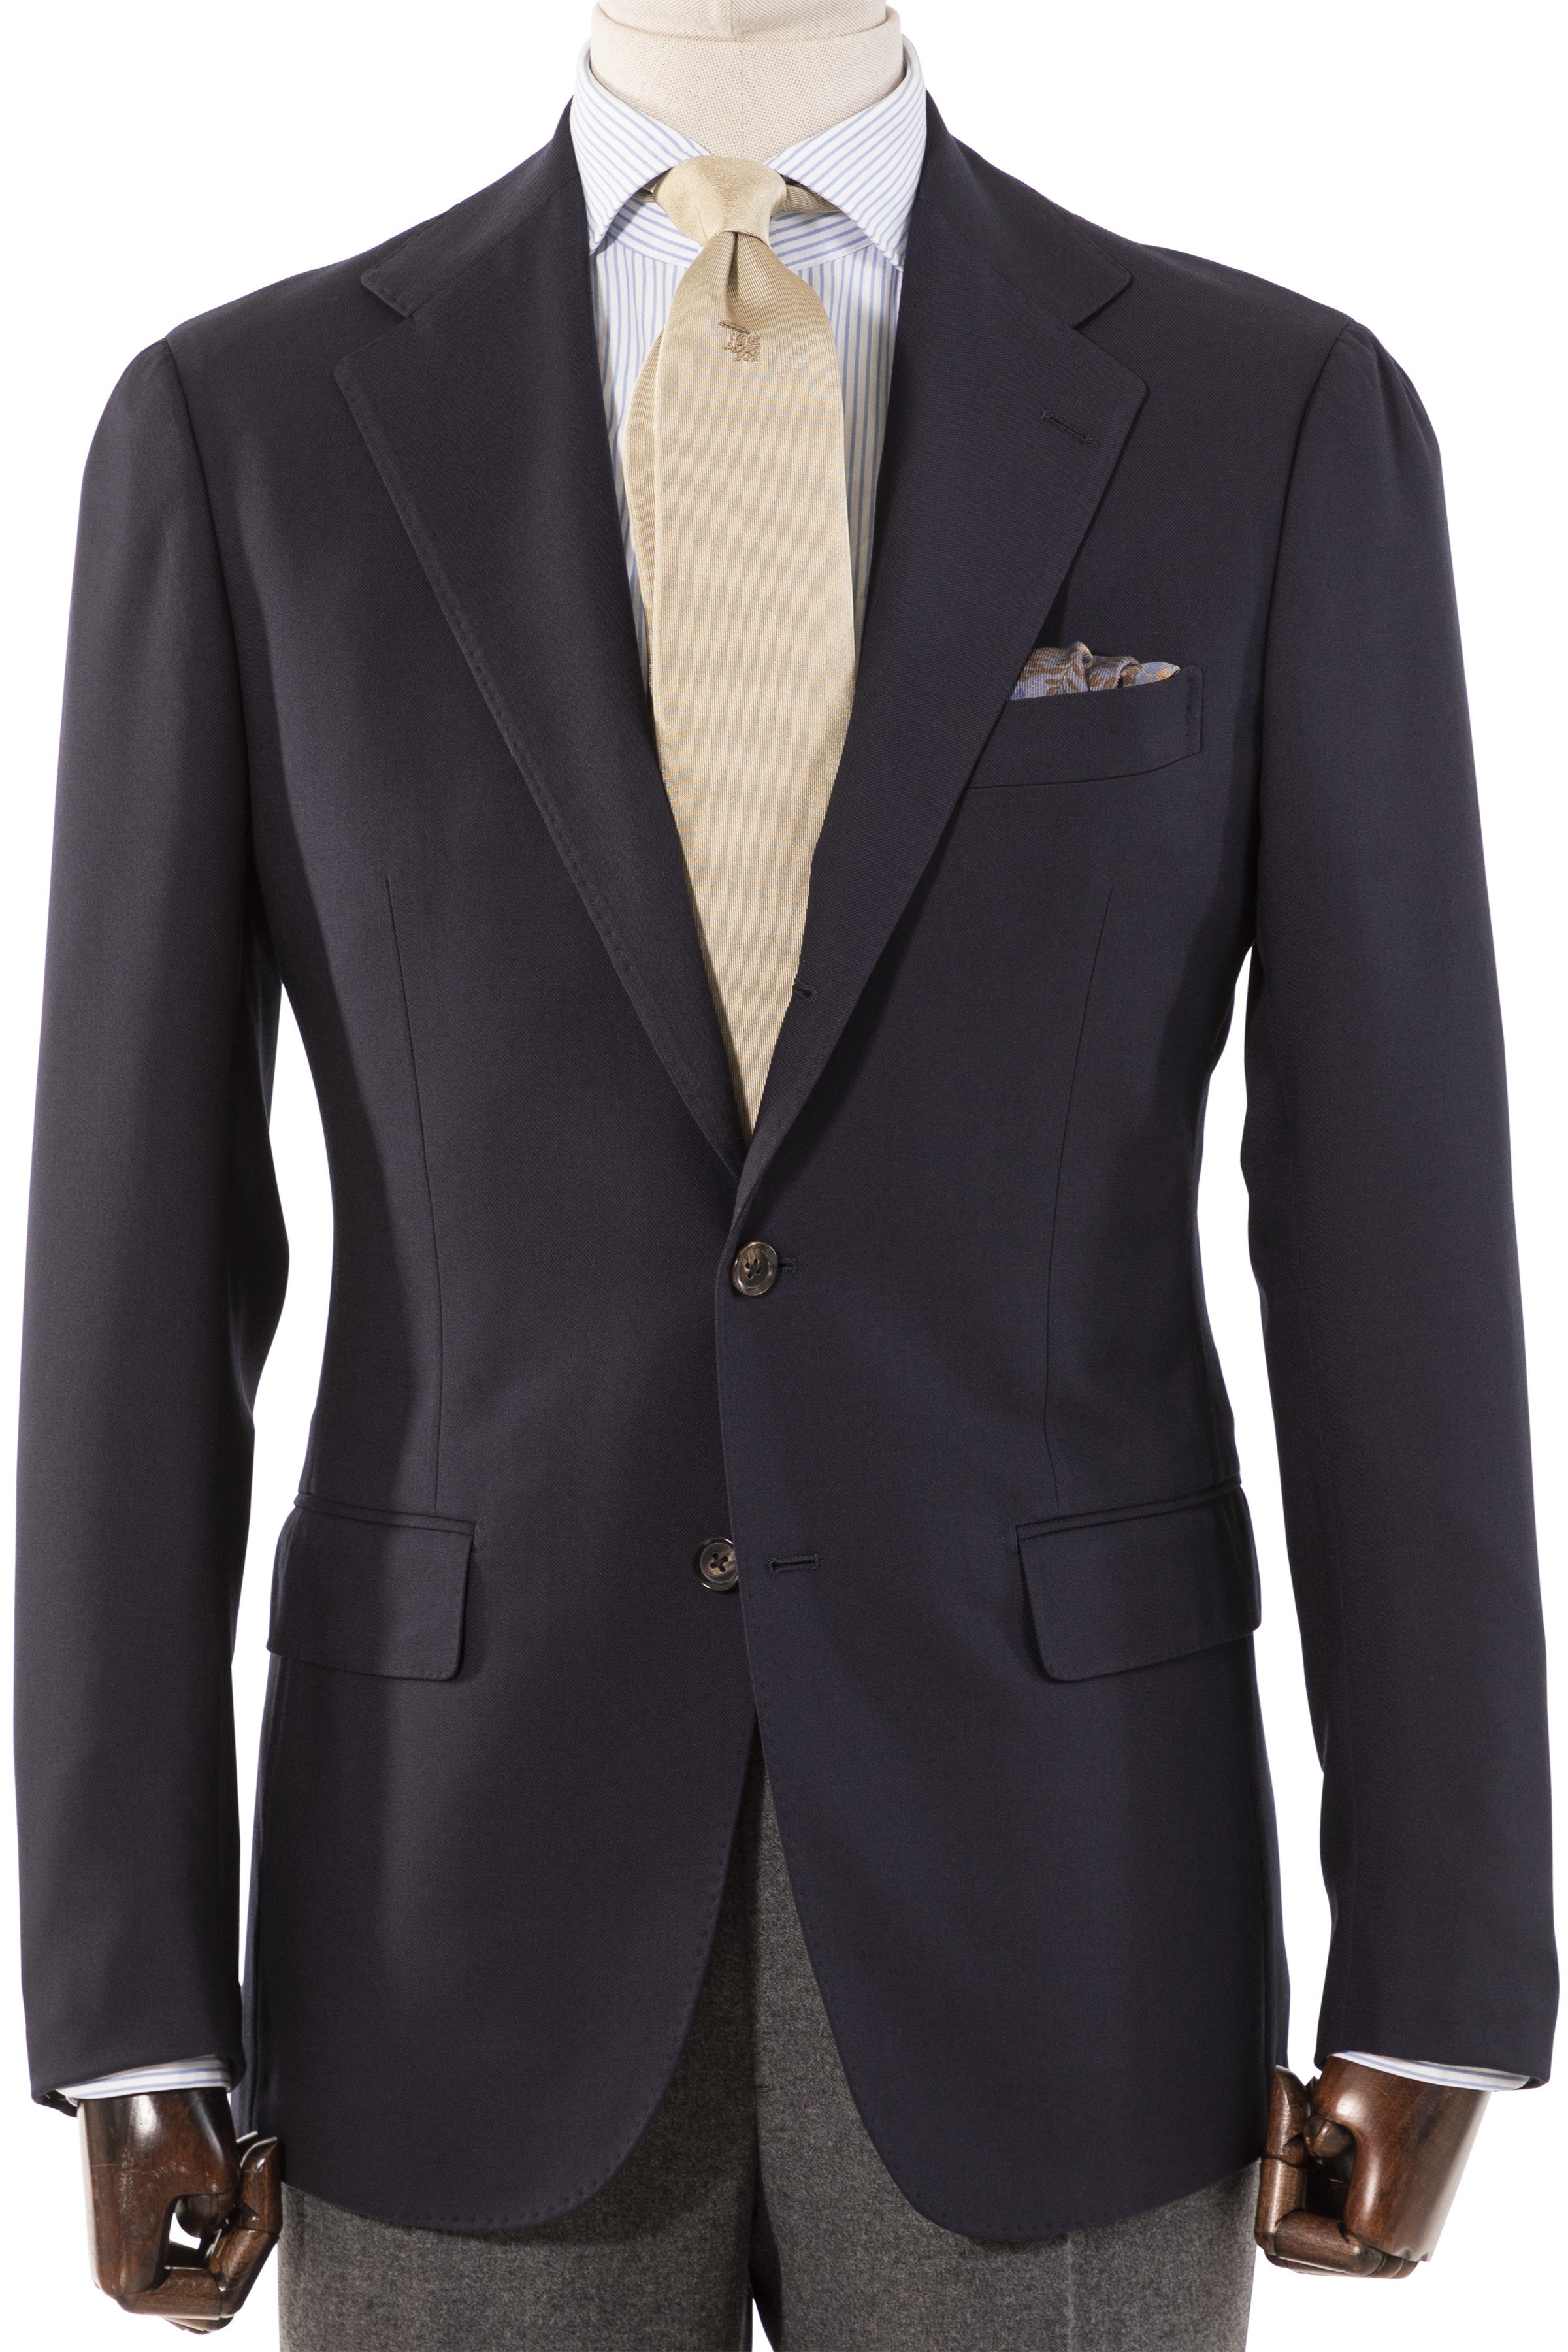 The Armoury by Ring Jacket Model 3 Armoury 10th Anniversary Decade Navy Twill Wool Sport Coat